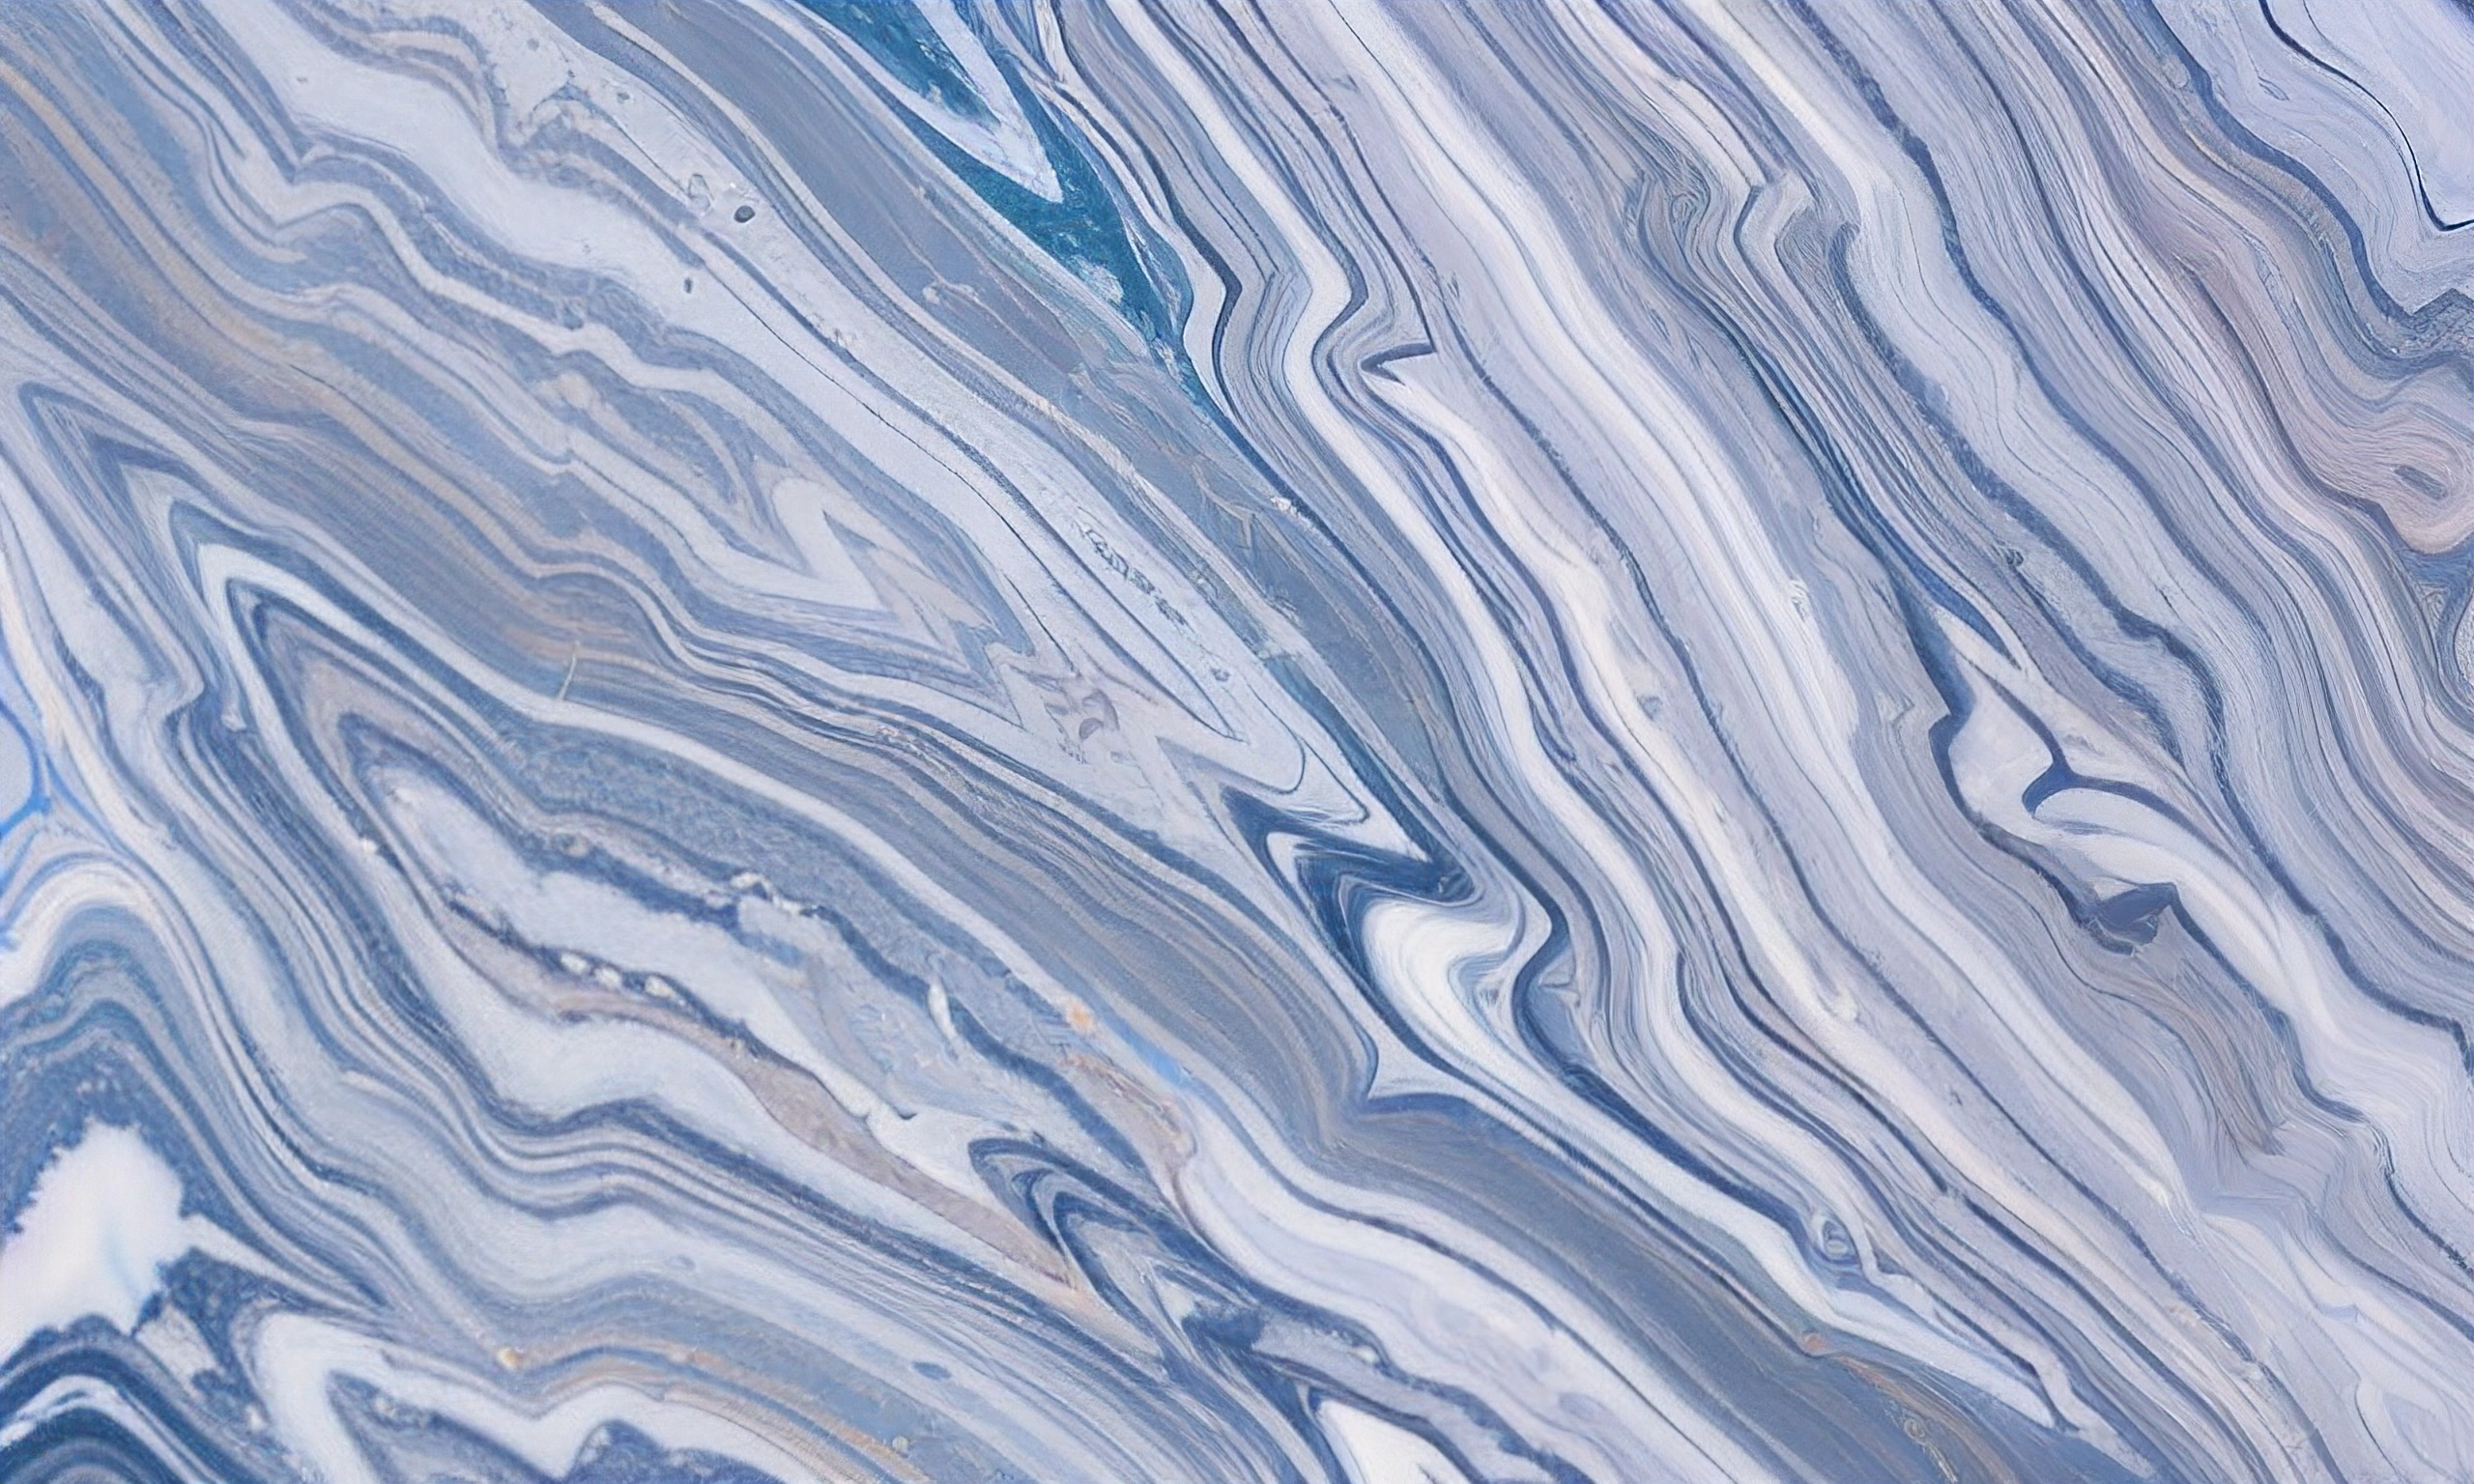 marbled surface with a blue and white pattern